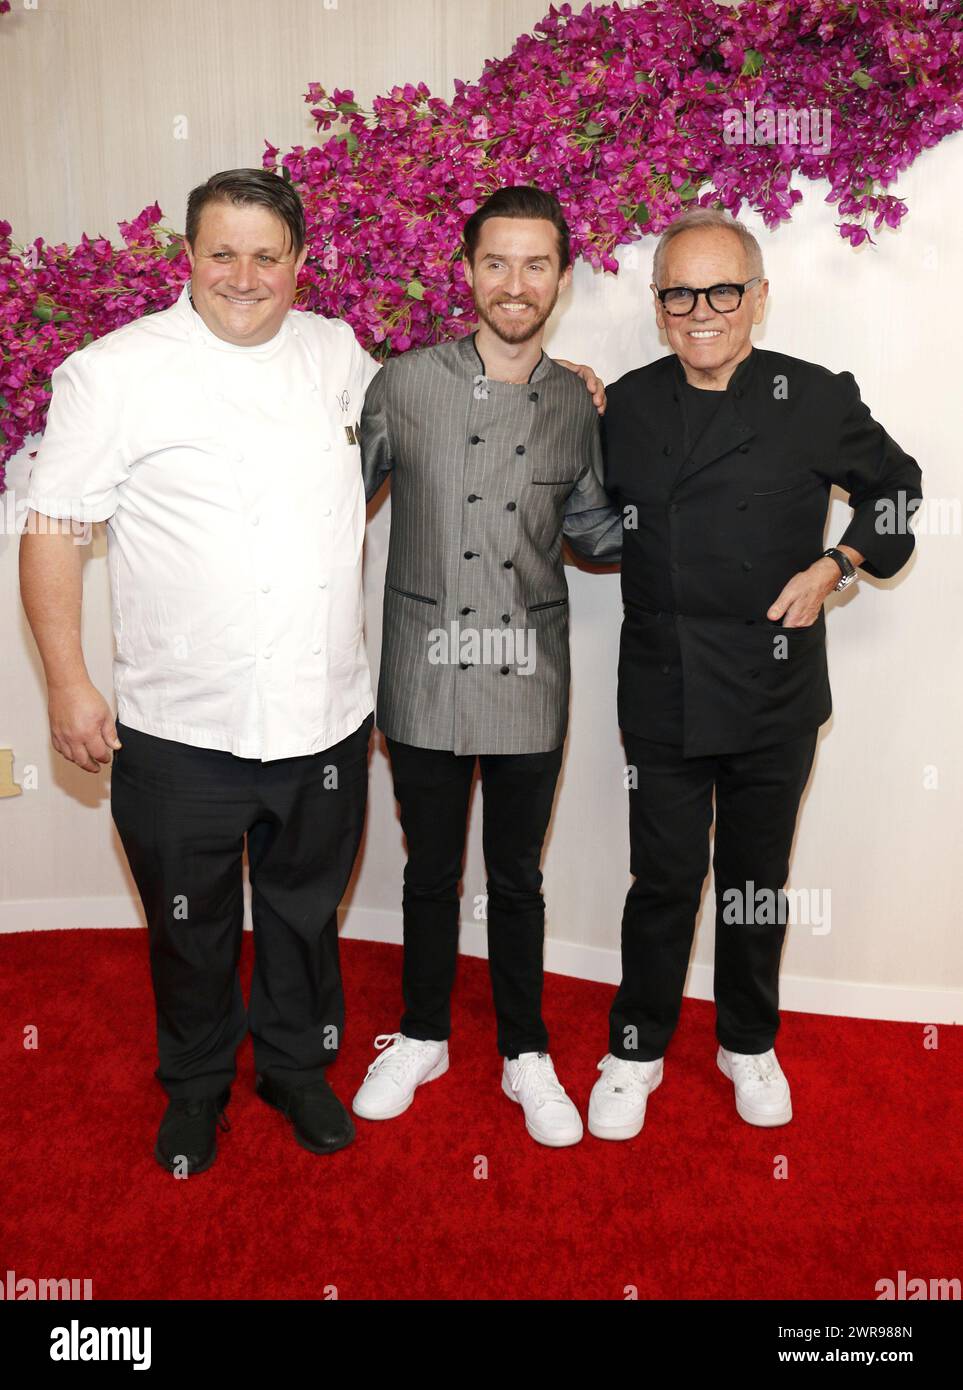 Byron Puck, Wolfgang Puck and Eric Klein at the 6th Annual Academy Awards held at the Dolby Theater in Hollywood, USA on March 10, 2024. Stock Photo